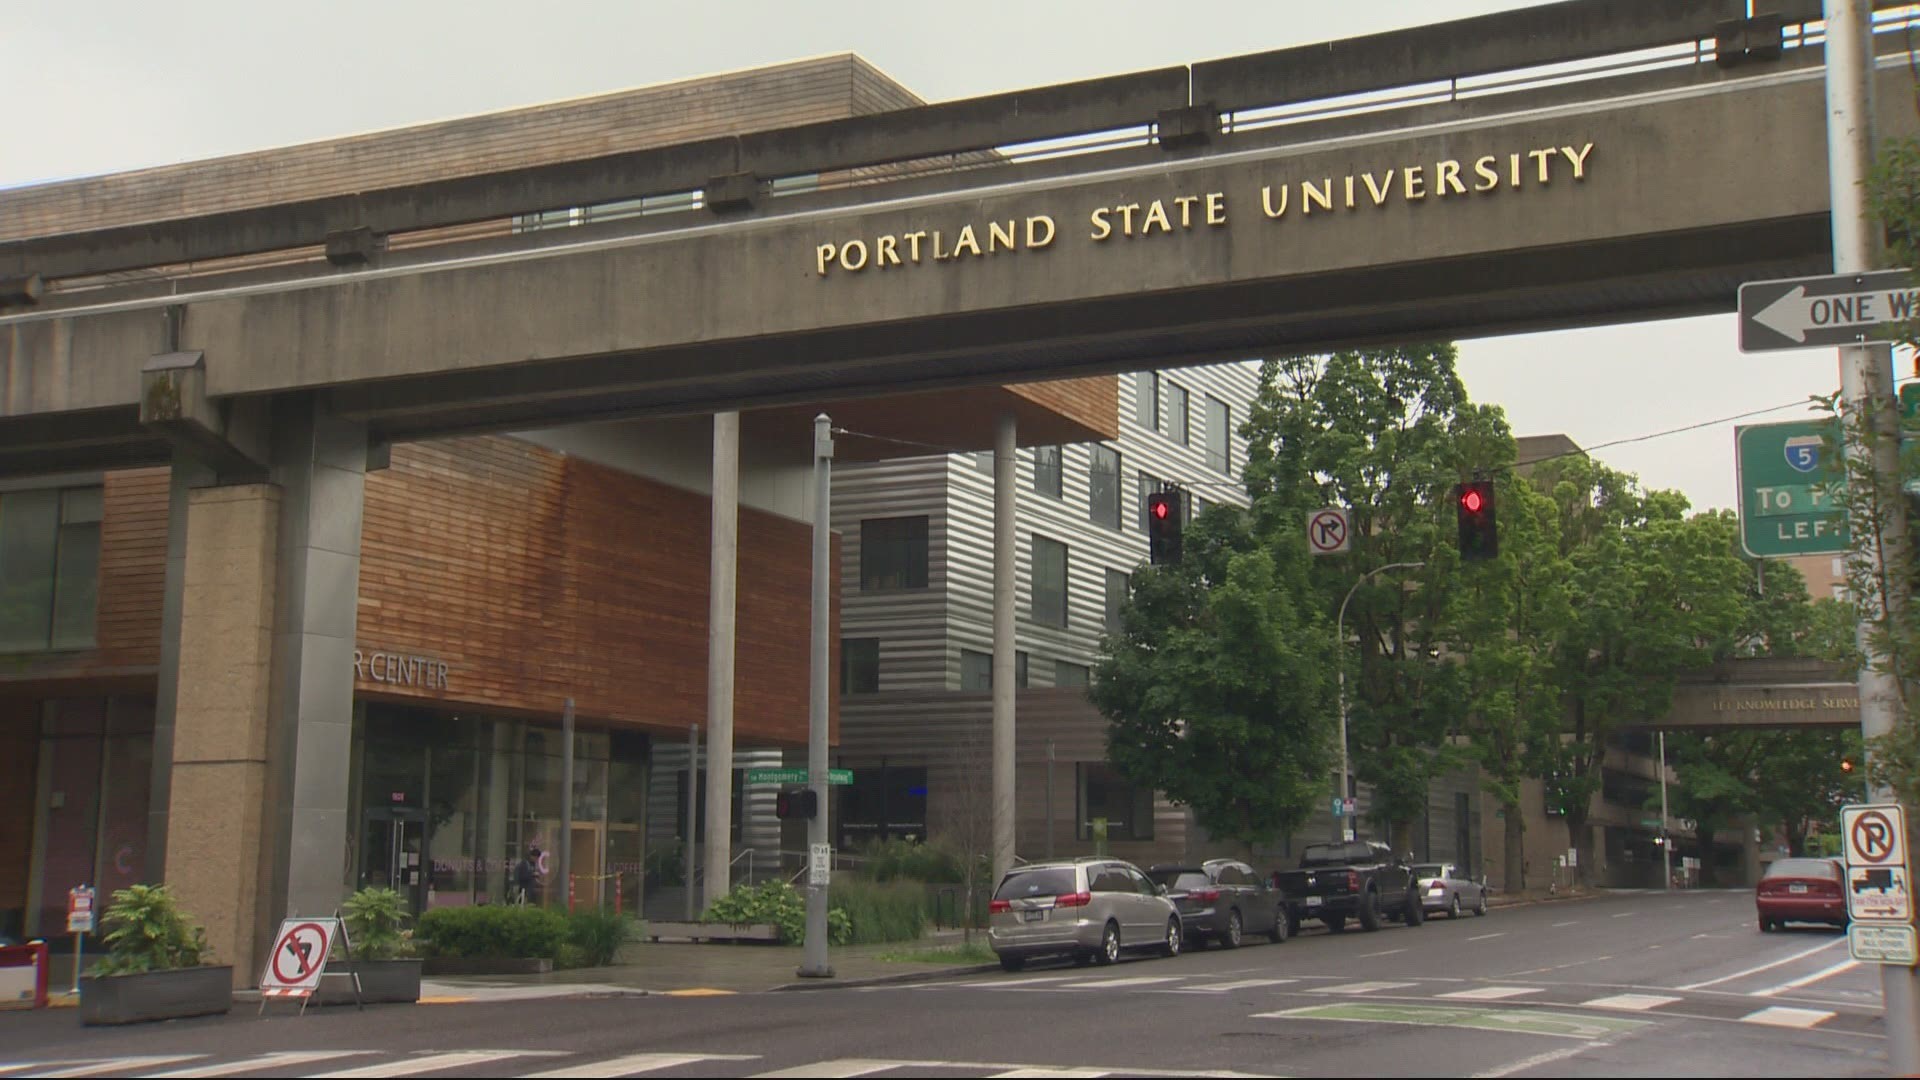 Calls to disarm PSU officers began in 2018 after two officers shot and killed Jason Washington. Witnesses said he was trying to break up a fight on campus.